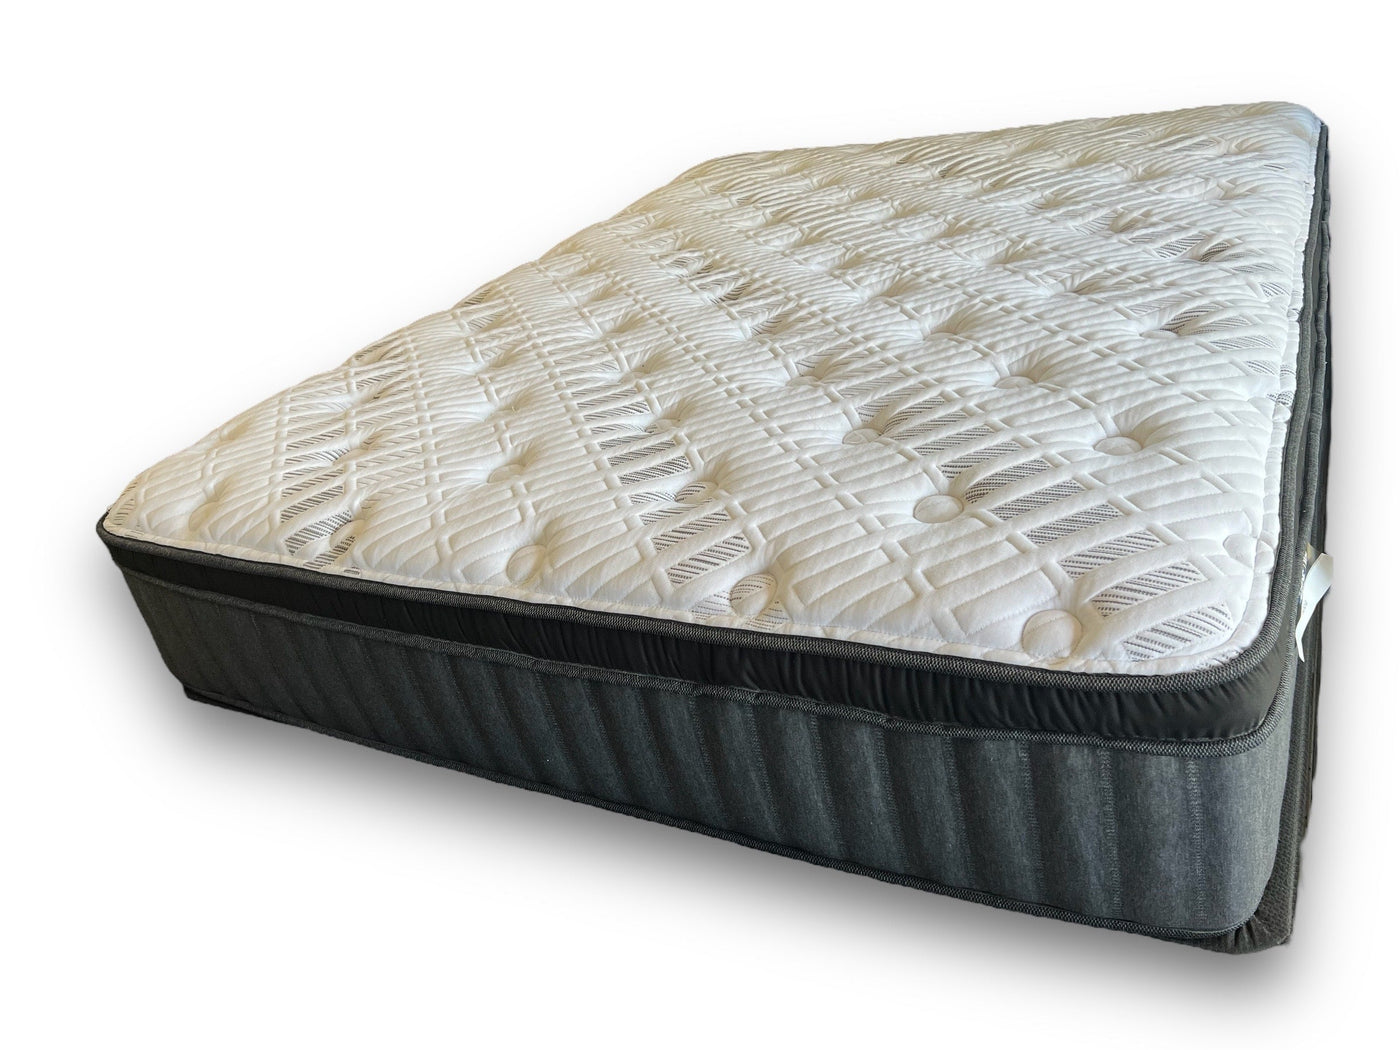 CLEARANCE Alicia Queen Plush Mattress Only WHOLESALE PRICE ON FLOOR MODEL